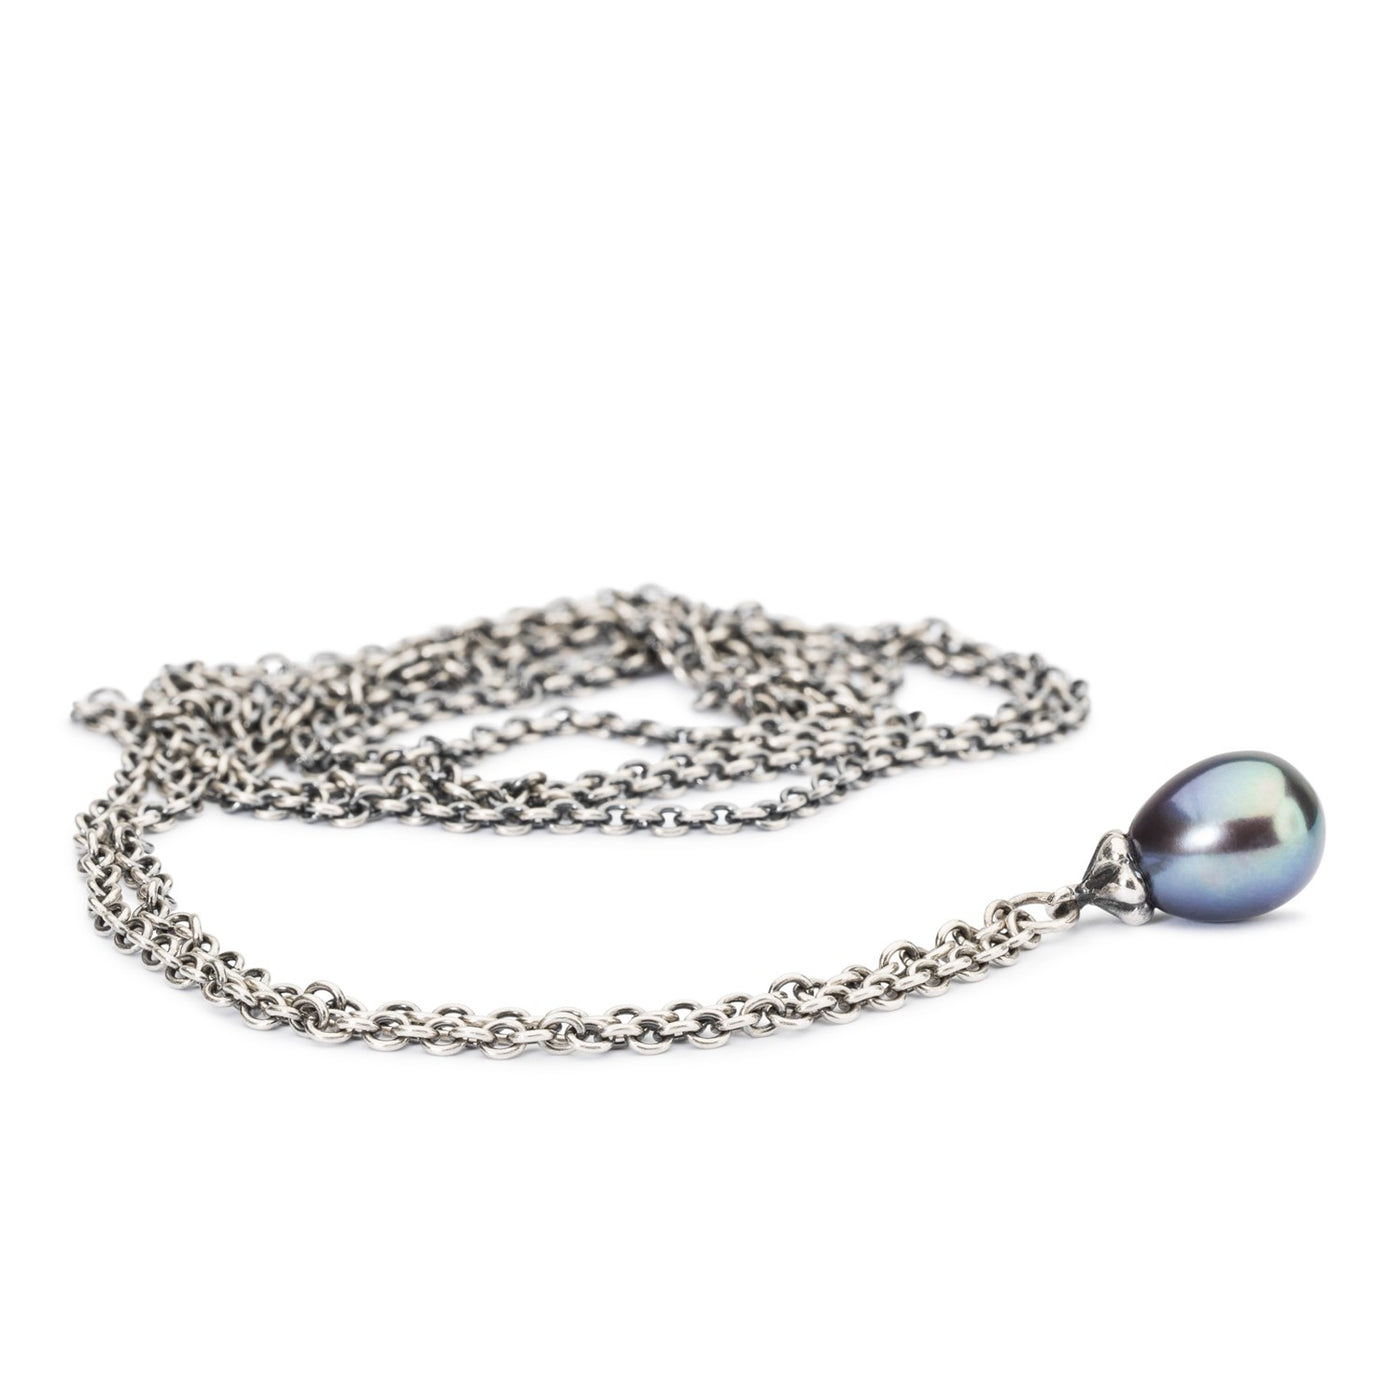 Fantasy Necklace with Peacock Pearl, featuring a delicate chain and a vibrant, iridescent pearl pendant. Suitable for adding beads and pendants for personalization.